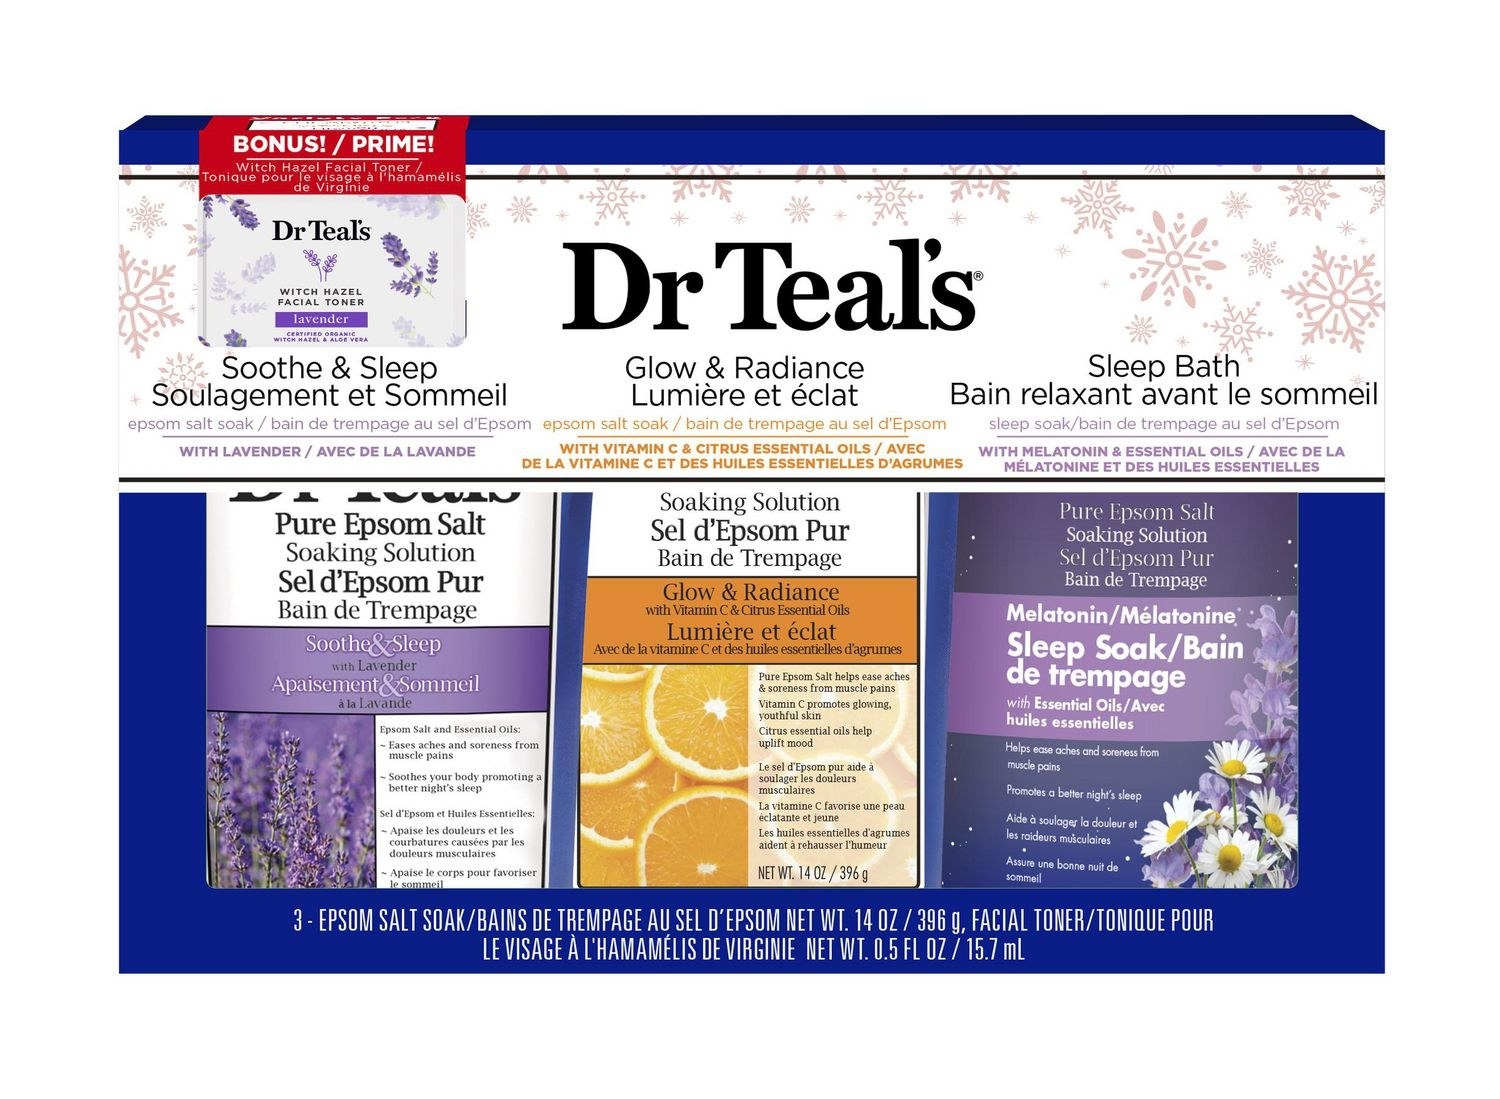 dr teal&#x27;s gift set that includes 3 bottles